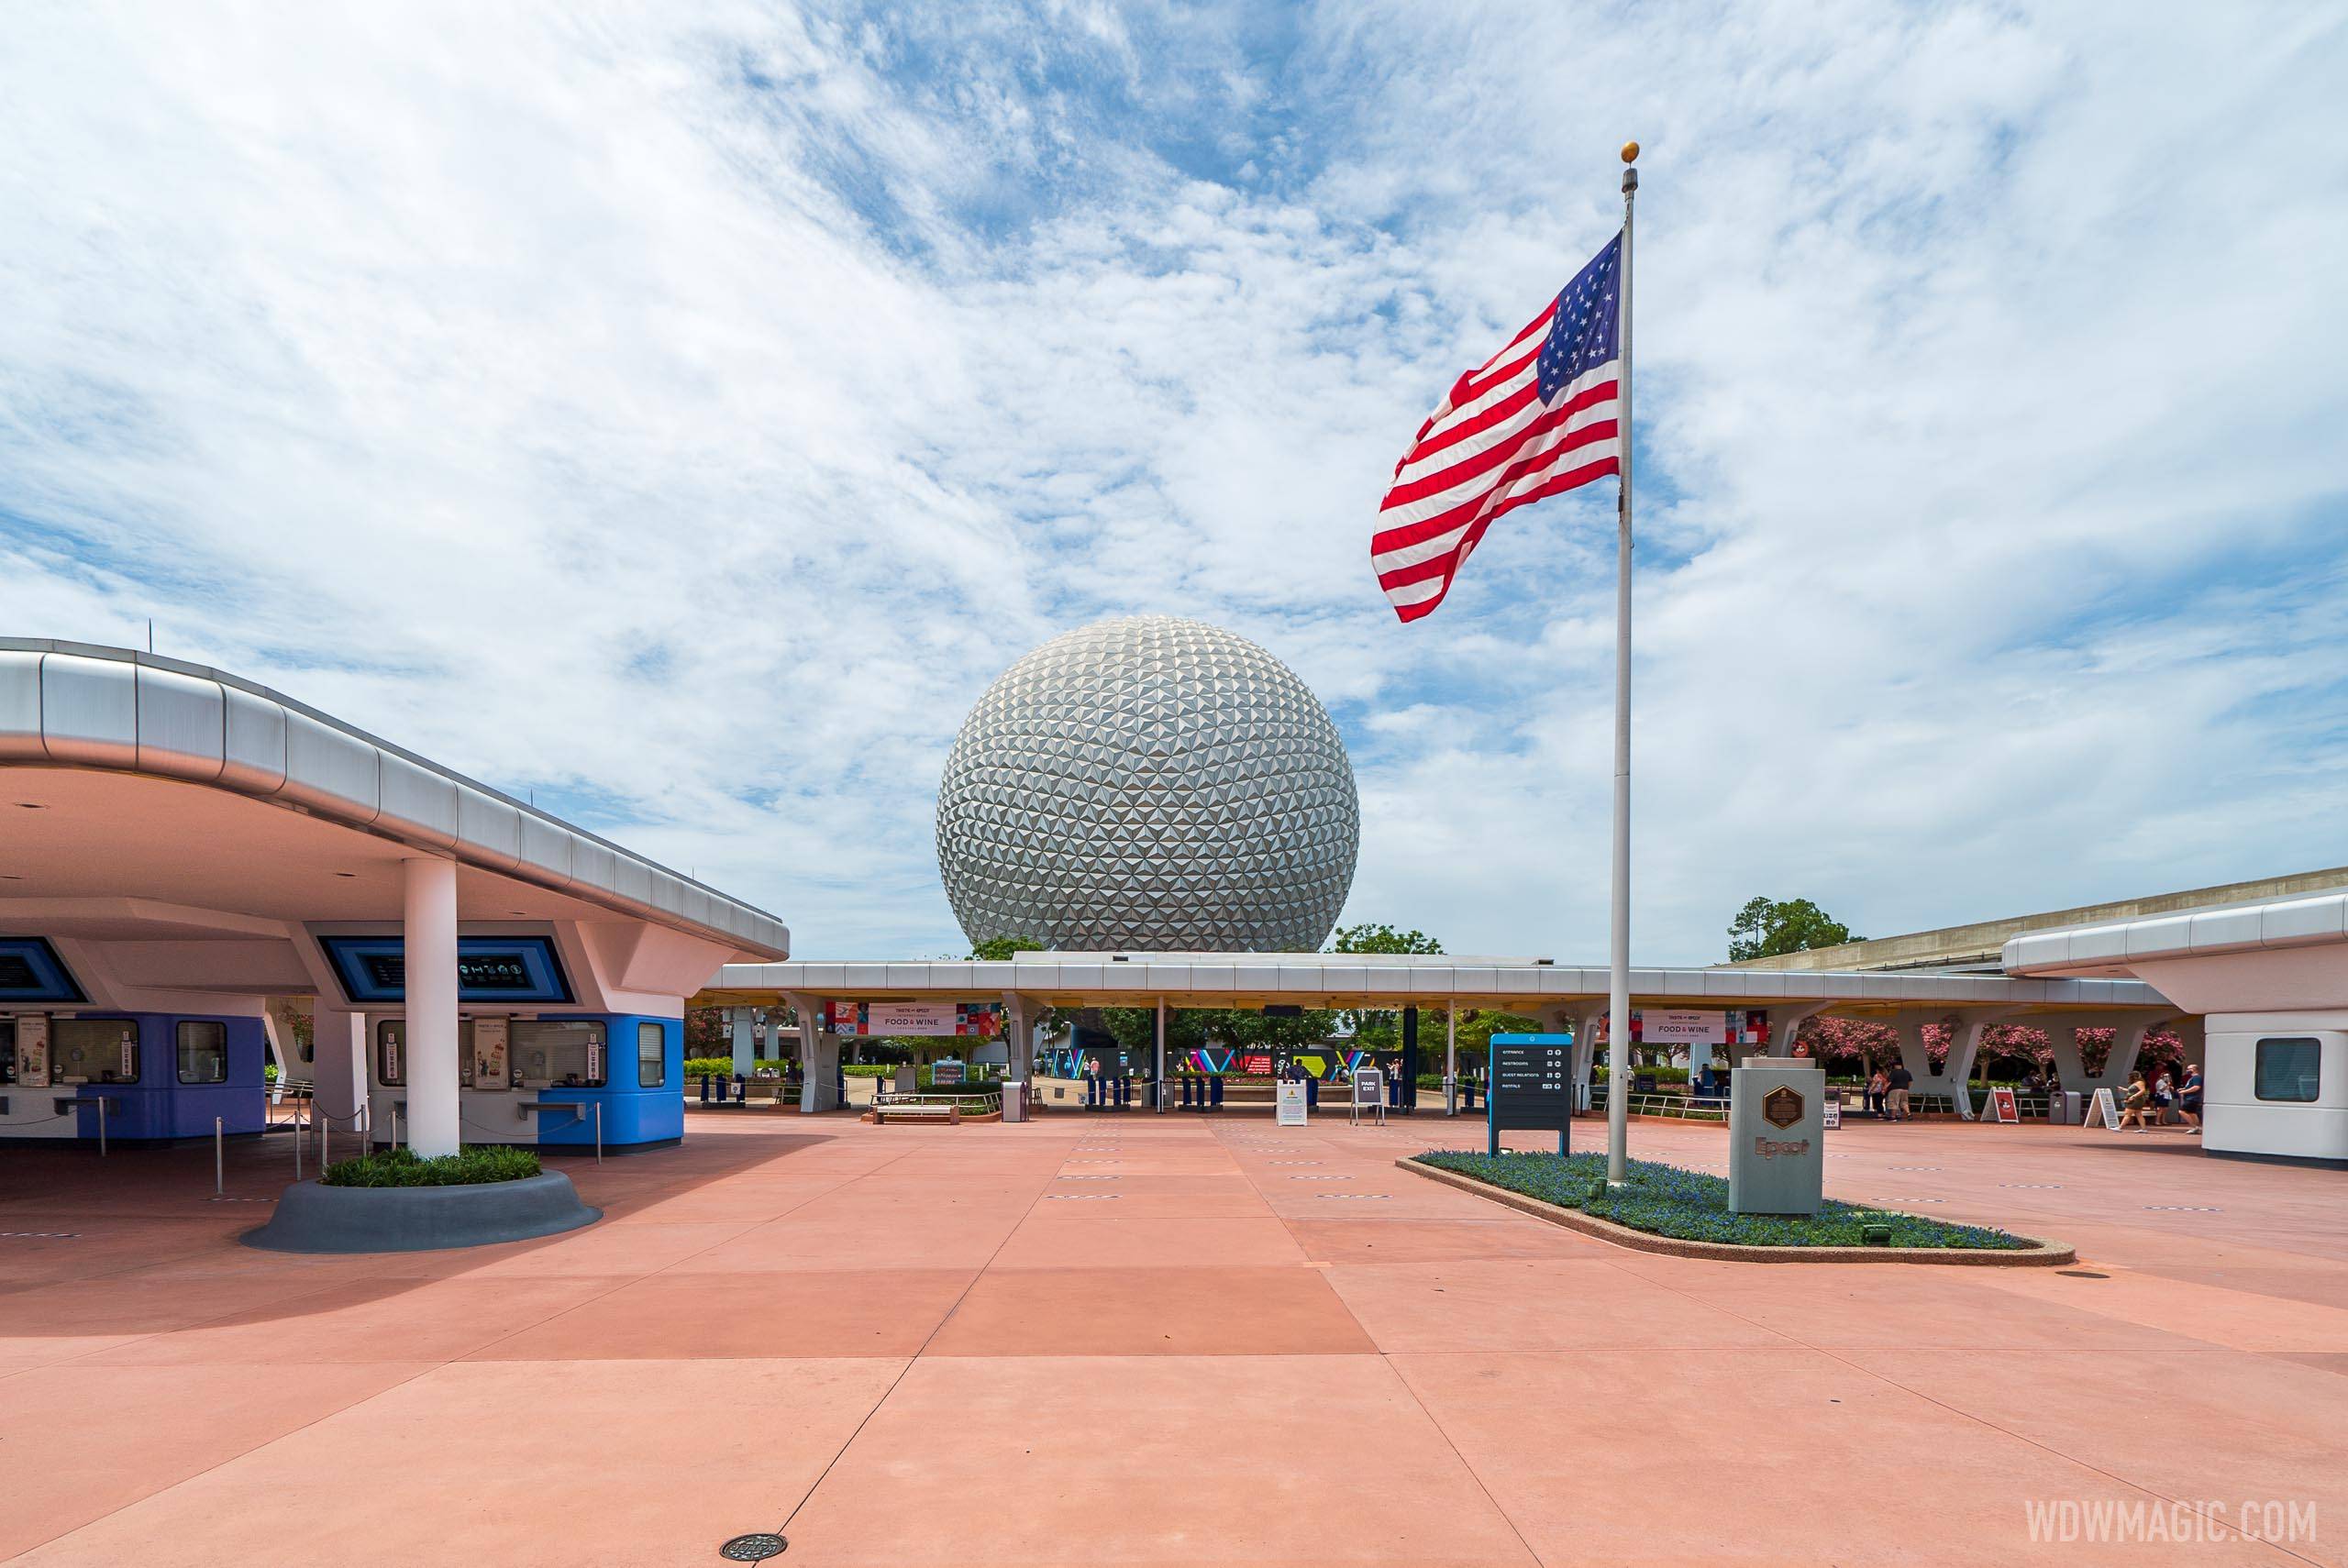 EPCOT has been the most badly impacted with attendance falling far below expectations